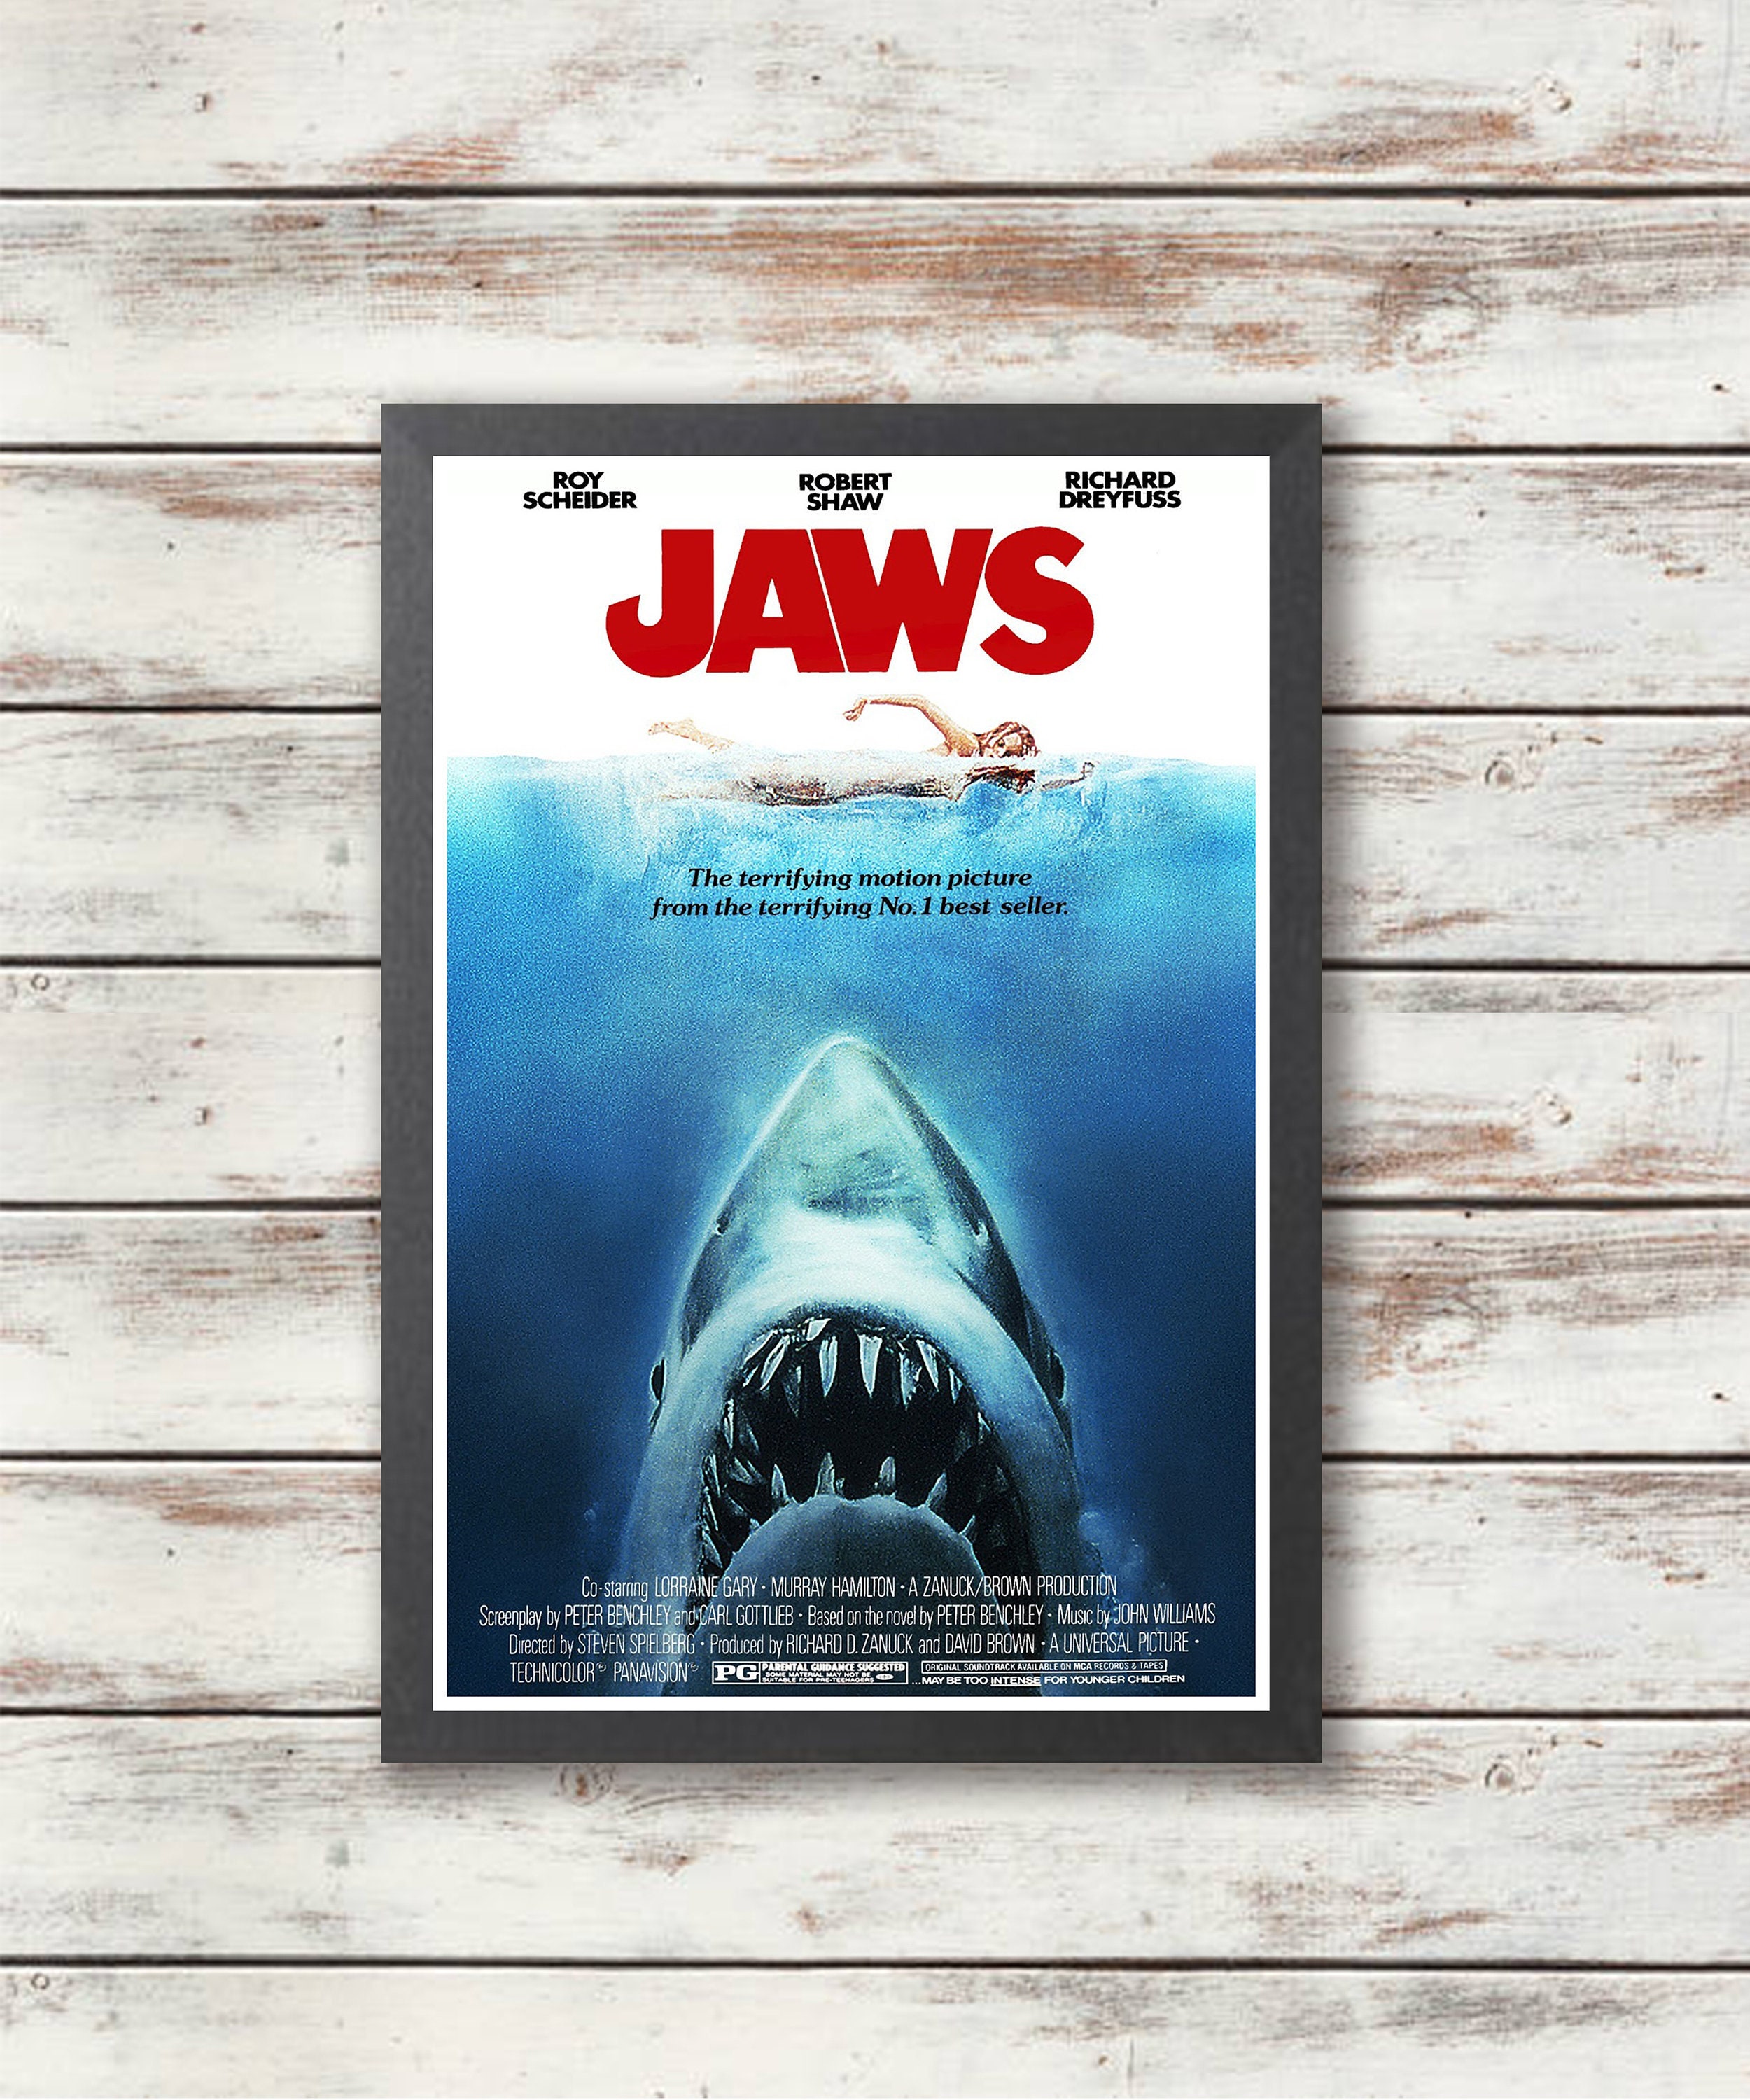 Discover Jaws - 1975 Movie Poster - Steven Spielberg - Printed Poster - Wall Decor - Gift Idea